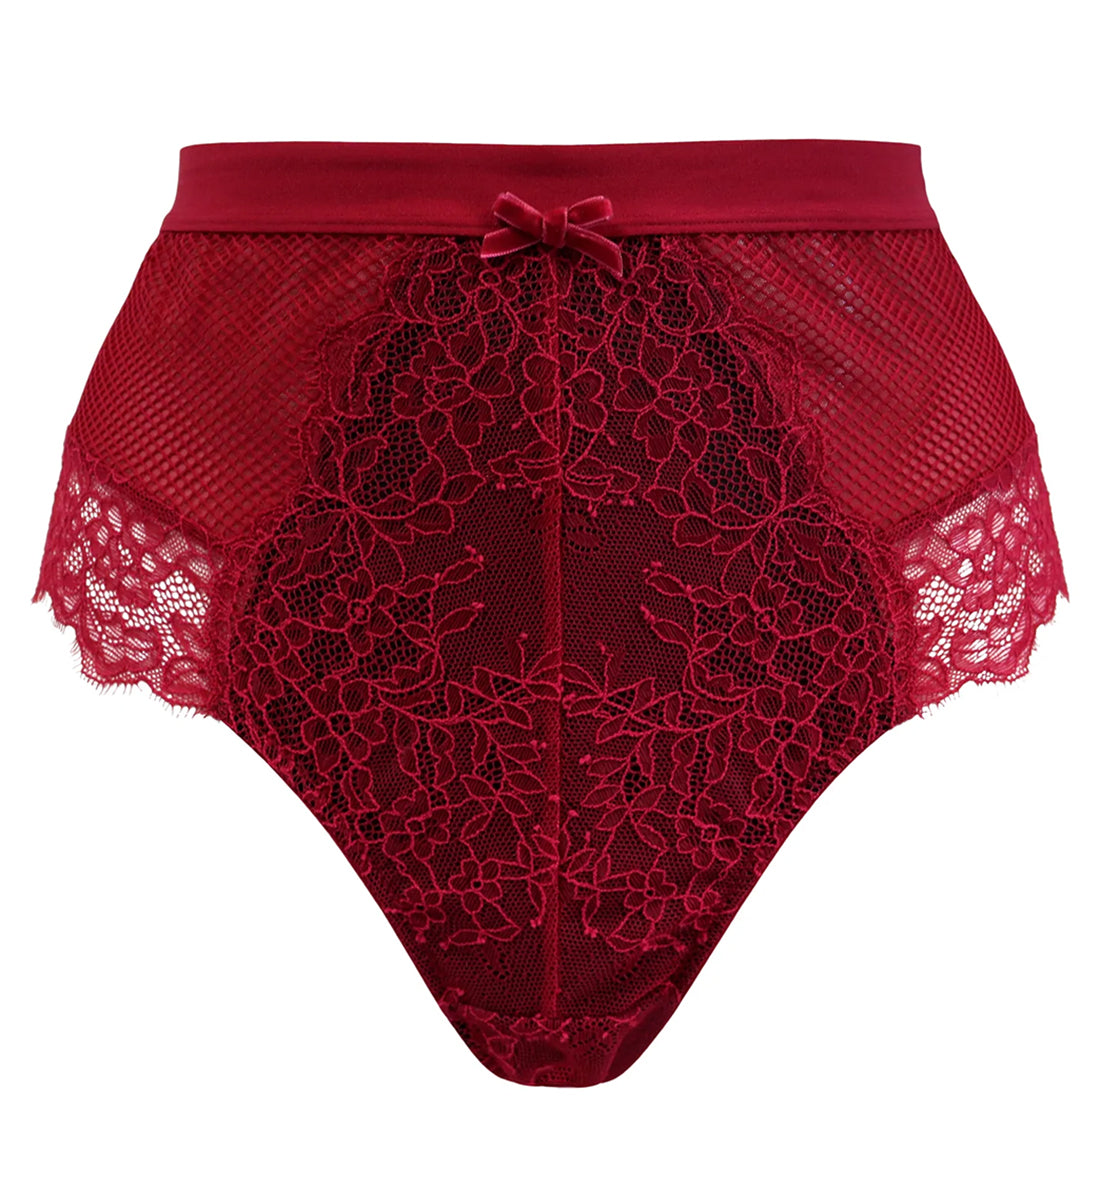 Pour Moi Dark Romance Deep Lace Up Brief (21703),XS,Red/Black - Red/Black,XS